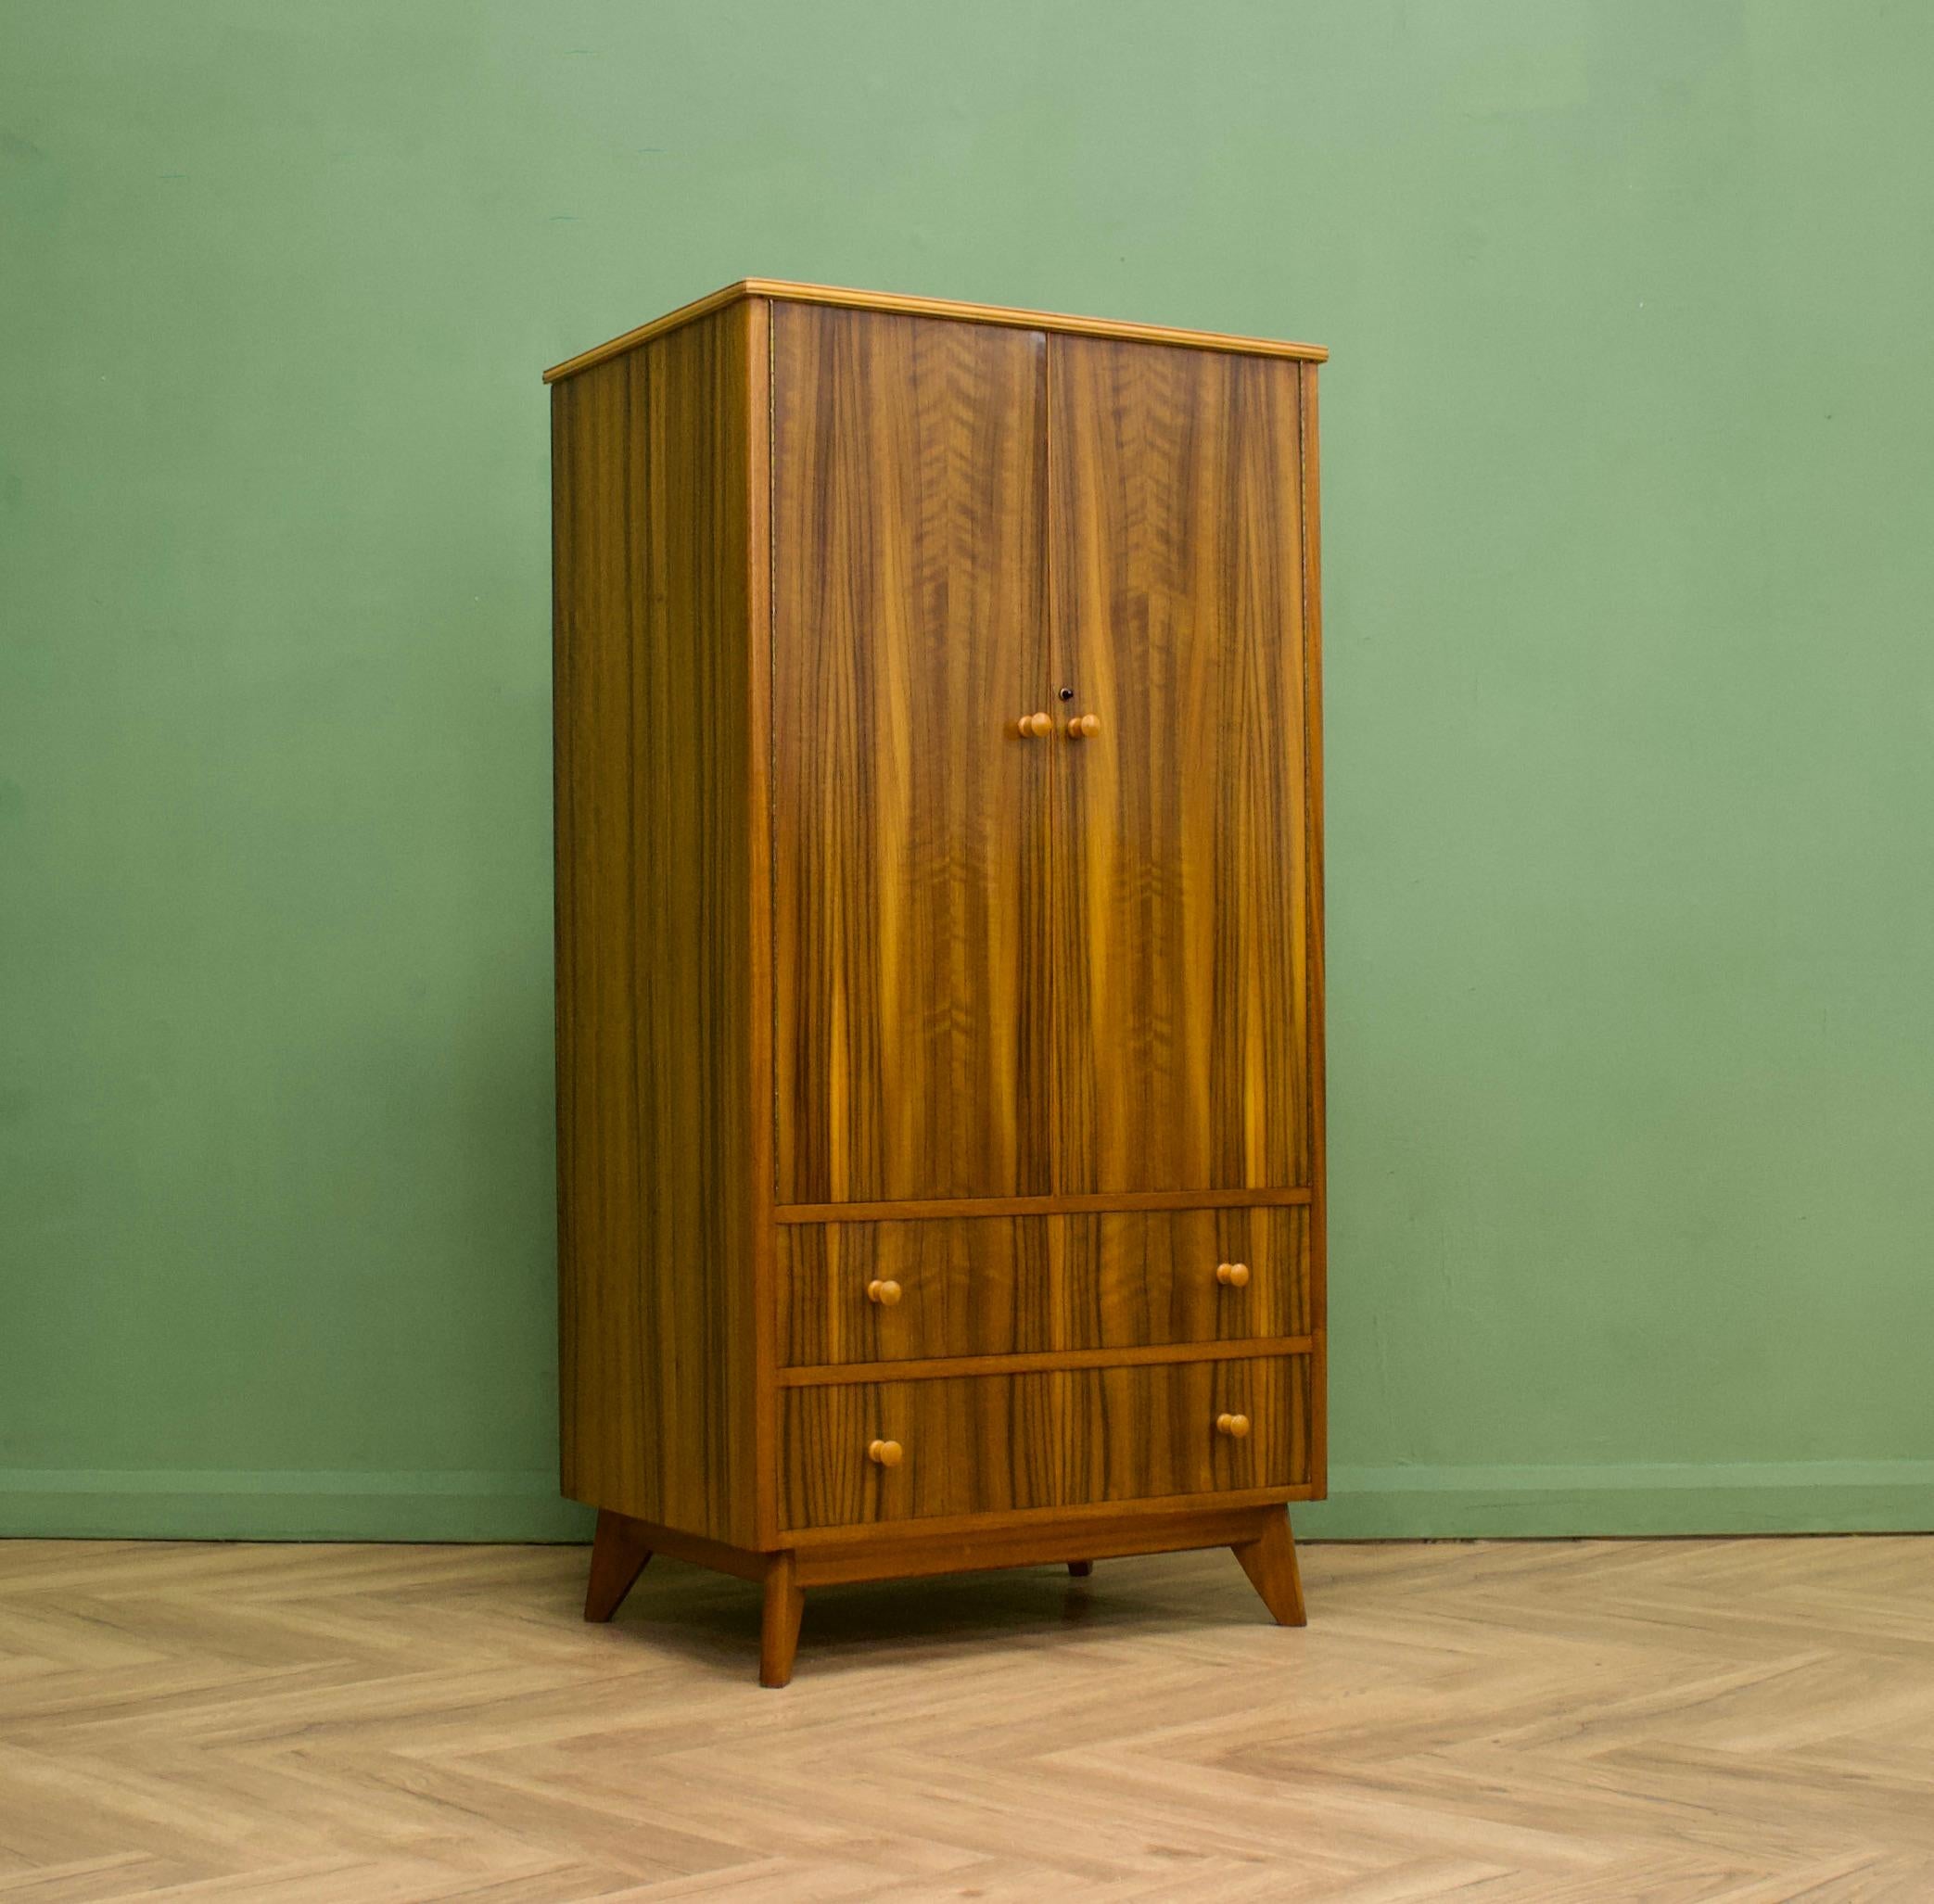 A walnut freestanding wardrobe by Morris of Glasgow - circa 1950s

Internally there is a hanging rail and to the bottom are two drawers- a lot of storage for such a compact wardrobe
The attractive legs are slightly tapered and the handles are solid